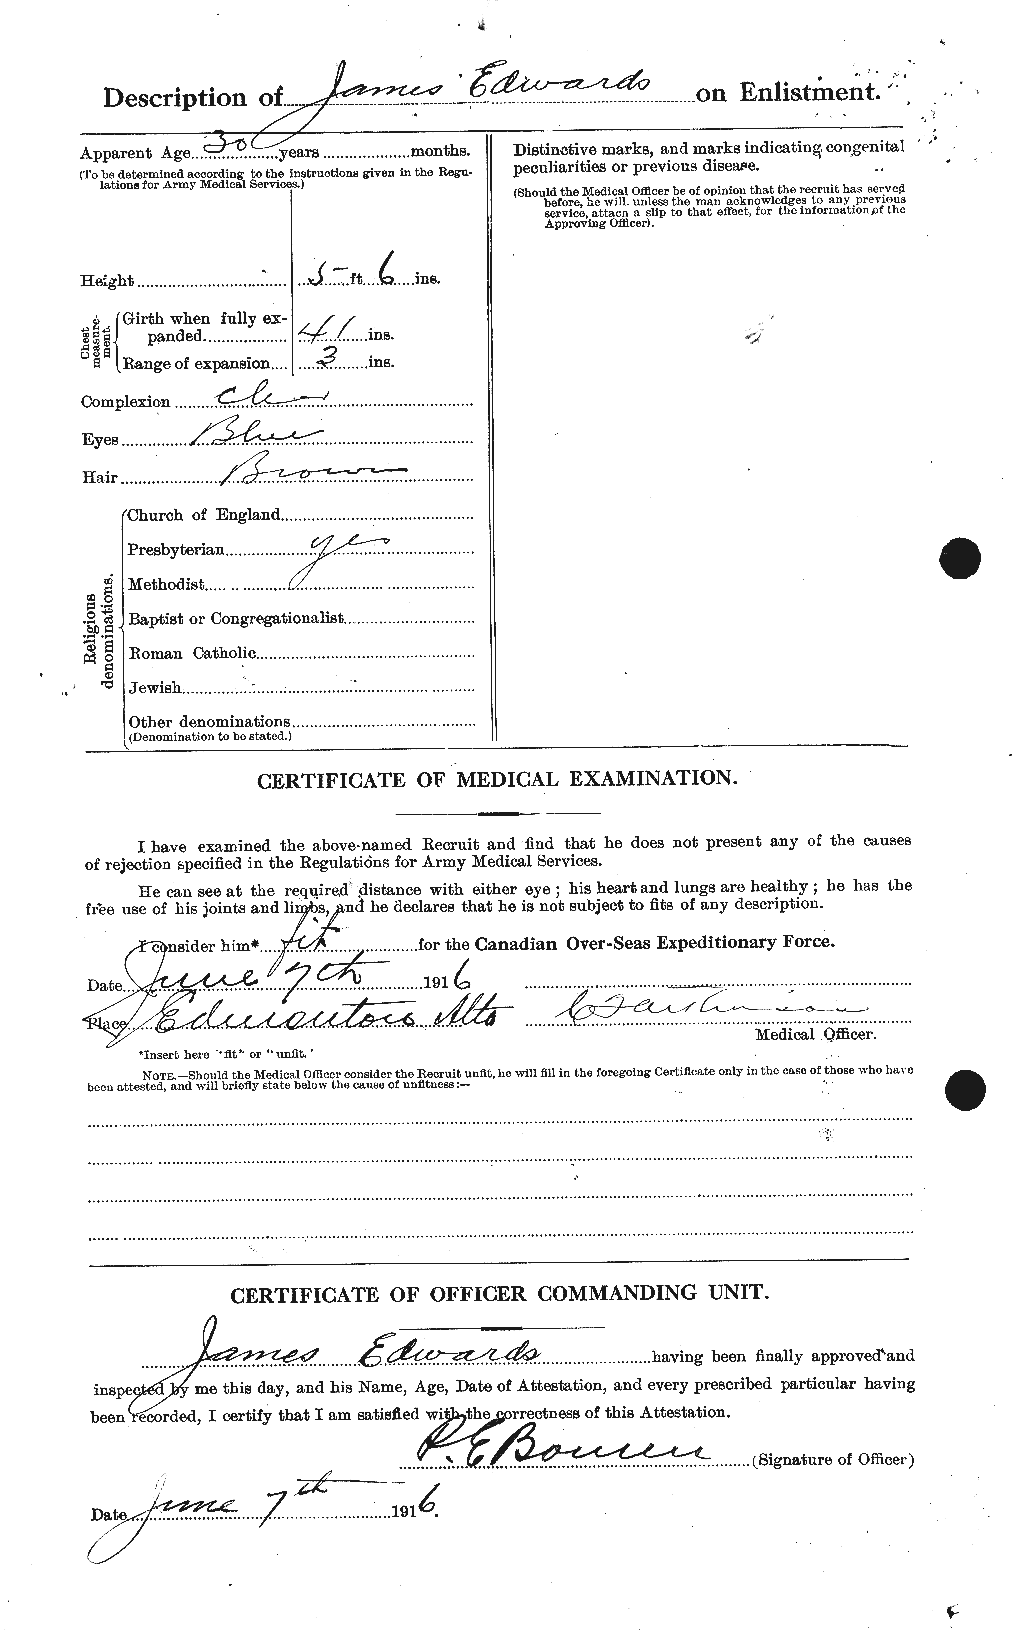 Personnel Records of the First World War - CEF 309807b